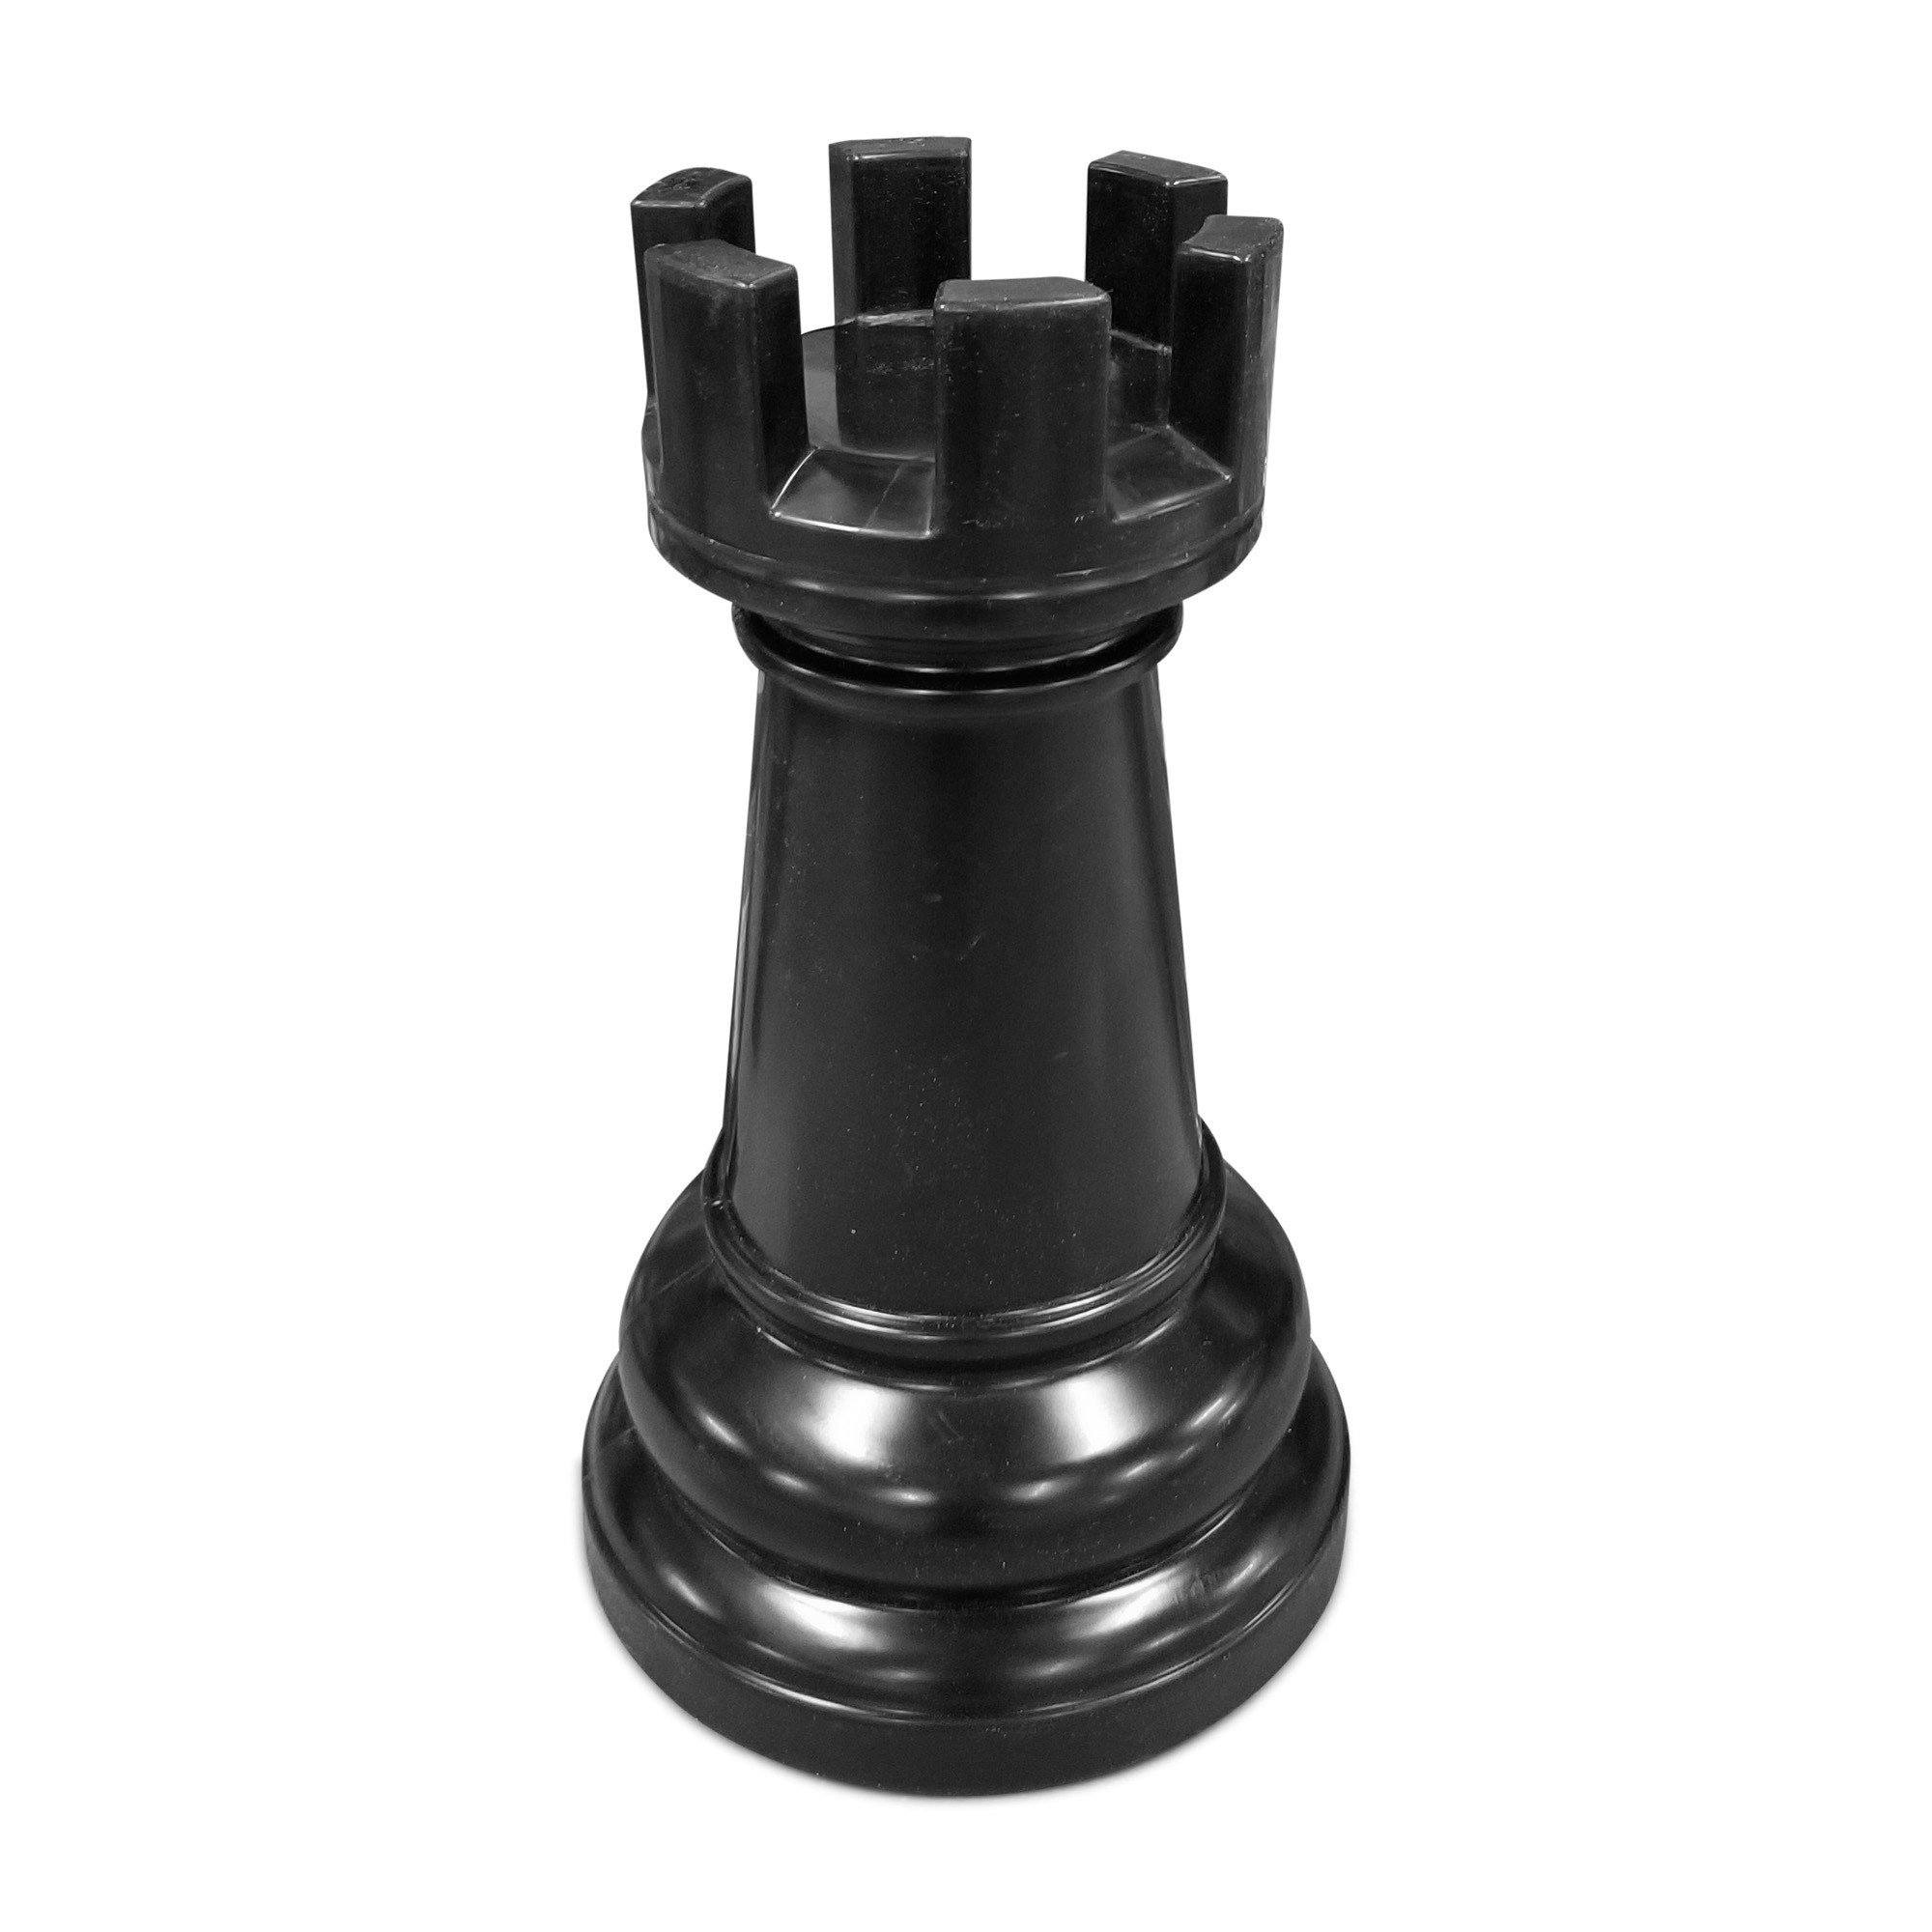  MegaChess Individual Chess Piece - Rook - 16.5 Inches Tall -  Black : Toys & Games